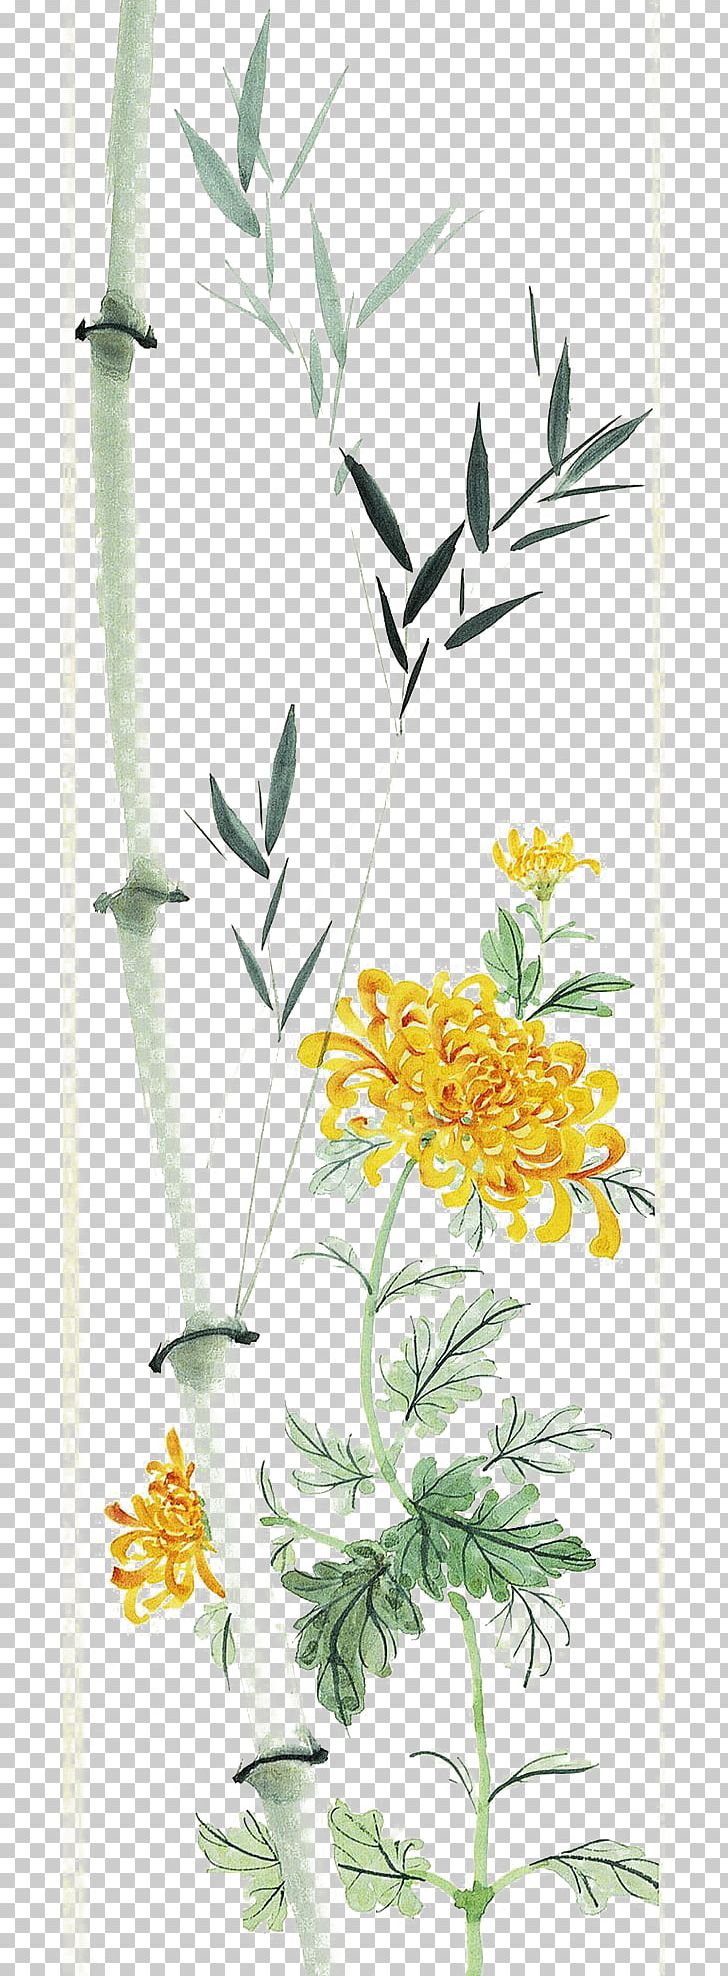 Chrysanthemum Bamboo Chinese Painting Leaf PNG, Clipart, Antiquity, Autumn Leaves, Bamboe, Bamboo Leaves, Banana Leaves Free PNG Download